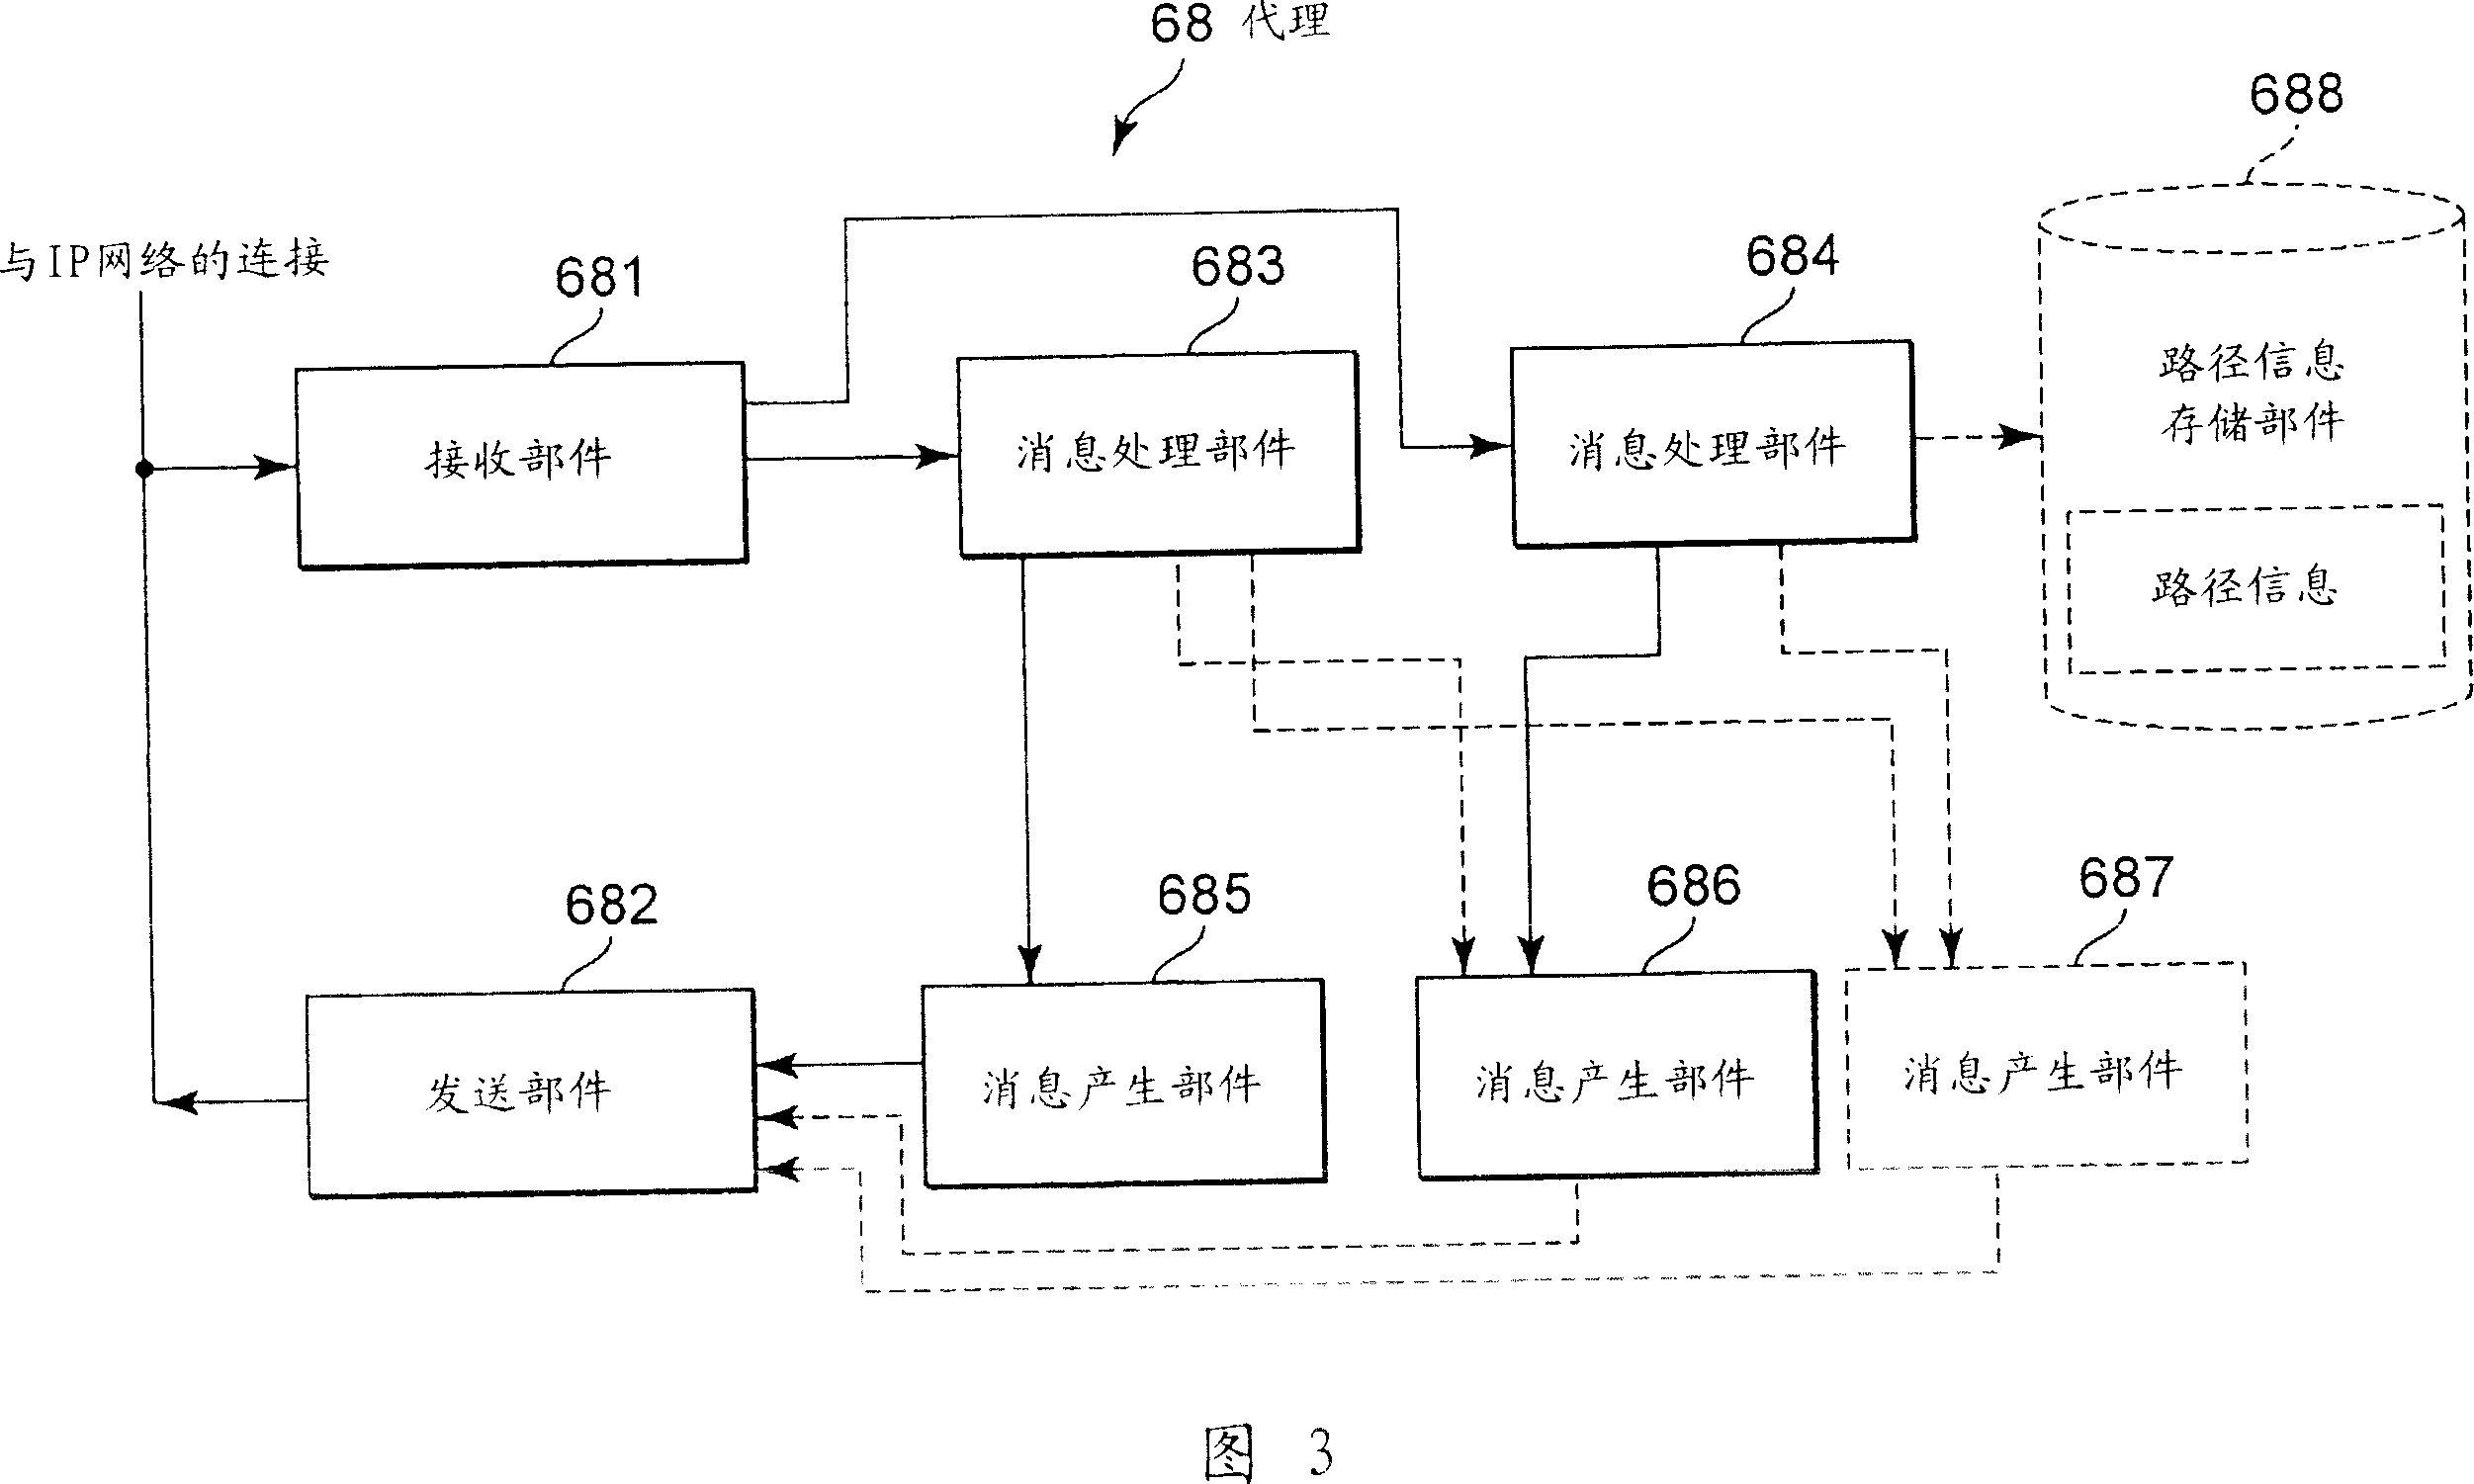 Communication handover method, communication message processing method, and program for executing these methods by use of computer